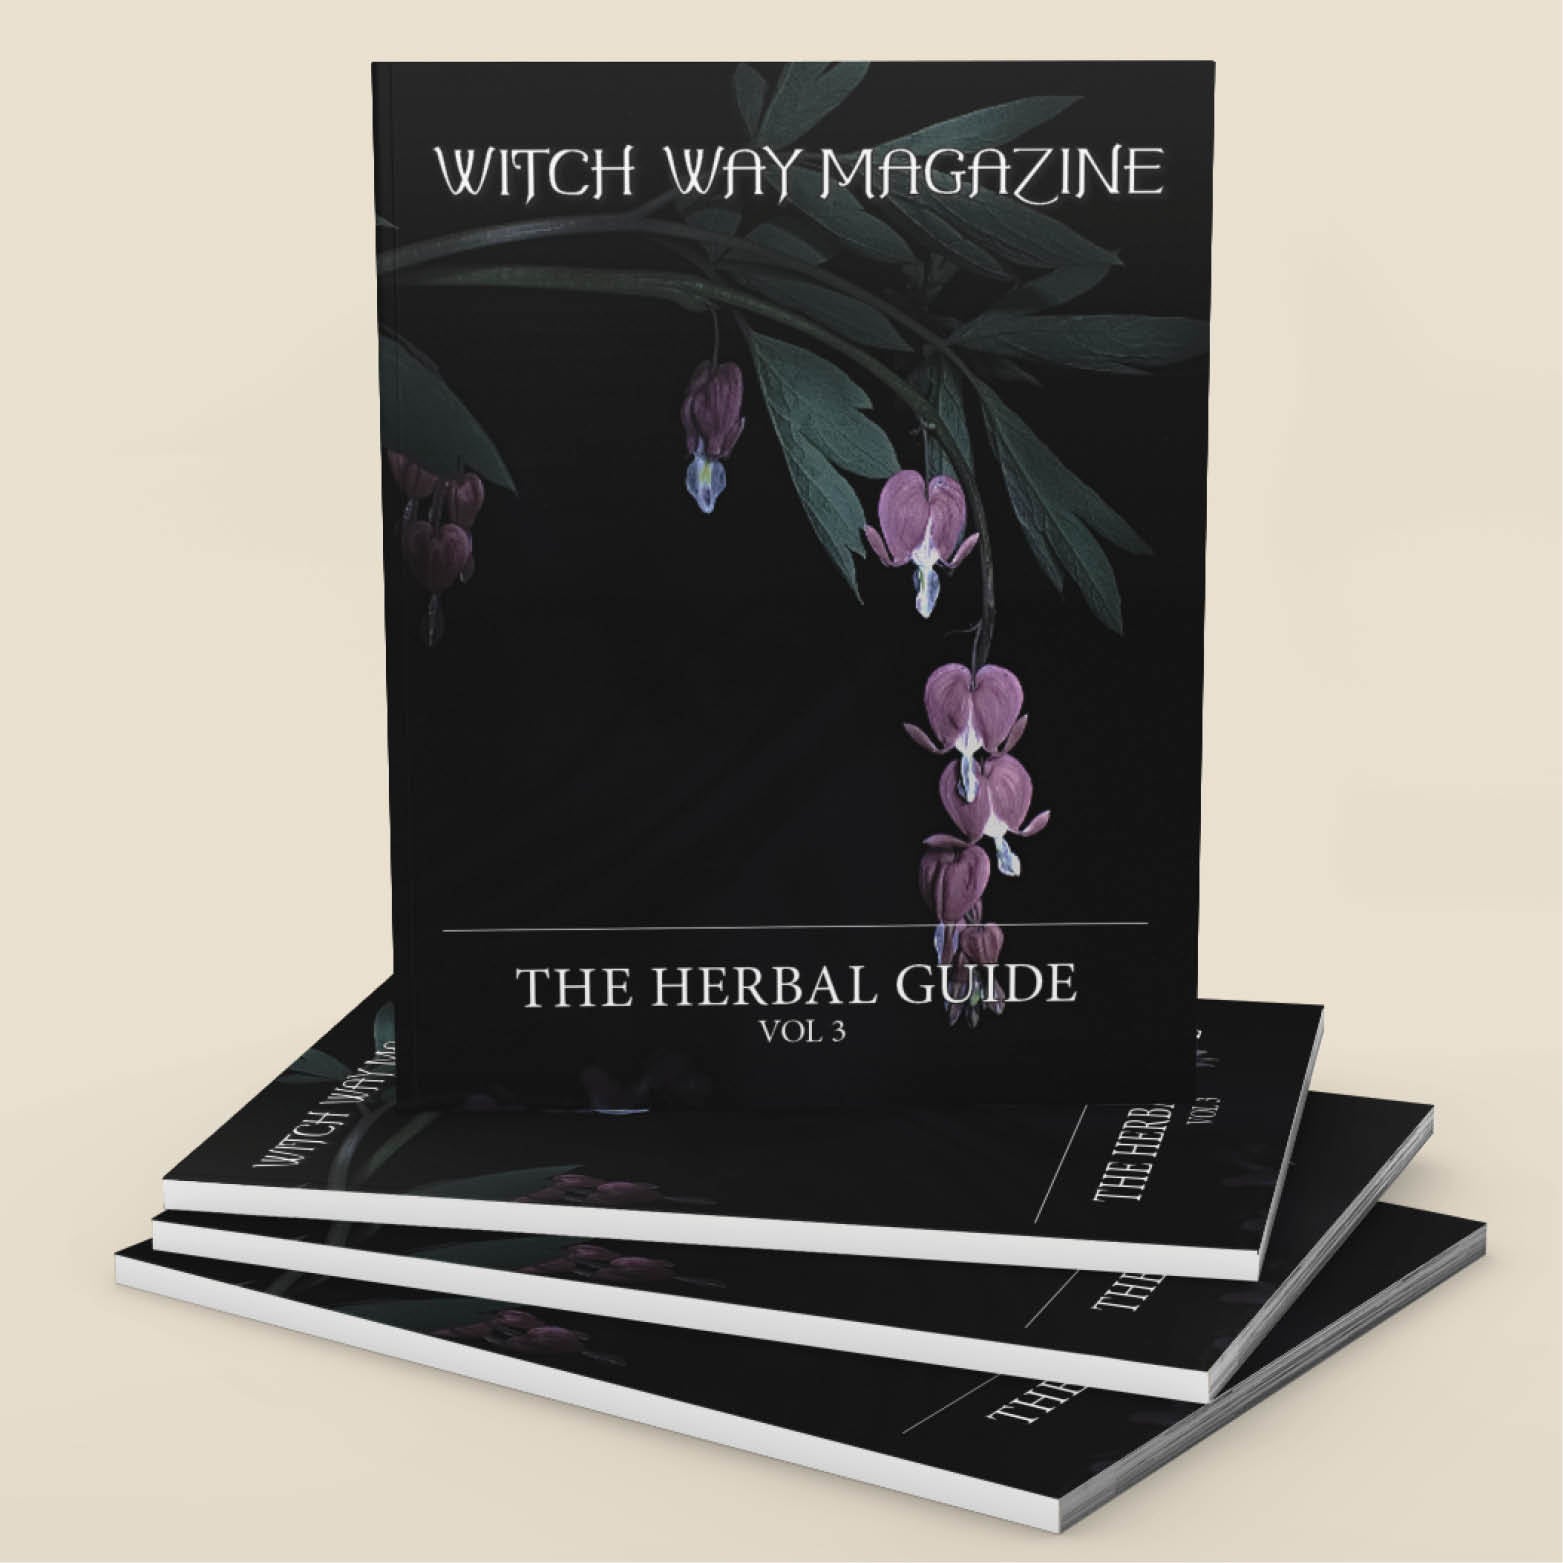 Witch Way Magazine 2018 Herbal Guide -  Vol 3 - Printed